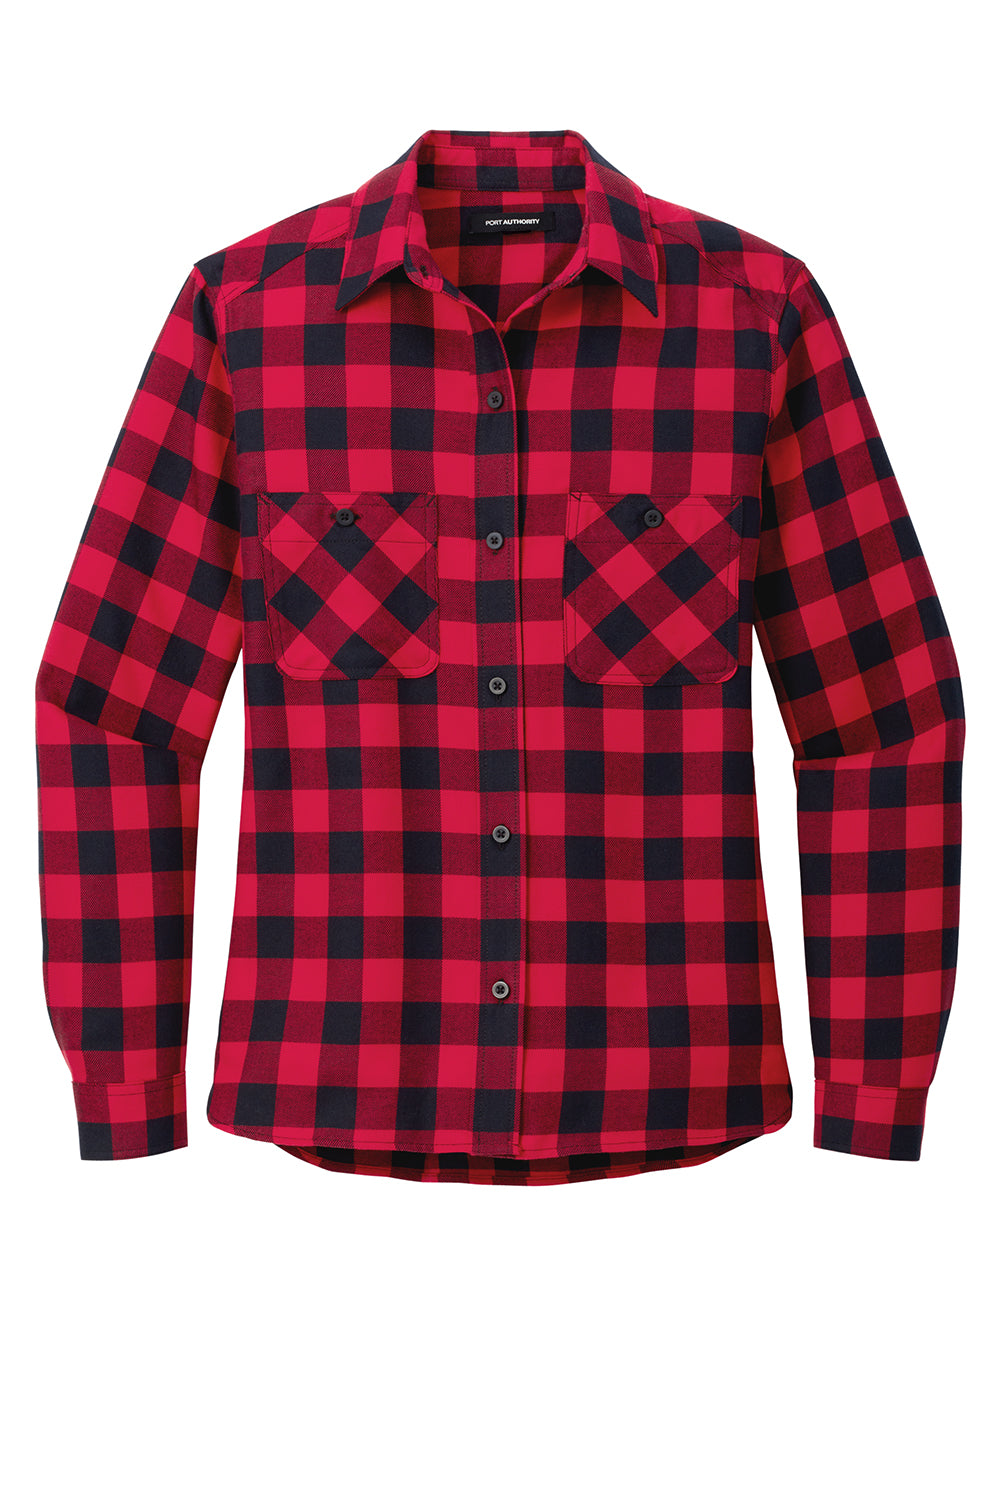 Port Authority LW669 Womens Plaid Flannel Long Sleeve Button Down Shirt Red/Black Buffalo Flat Front